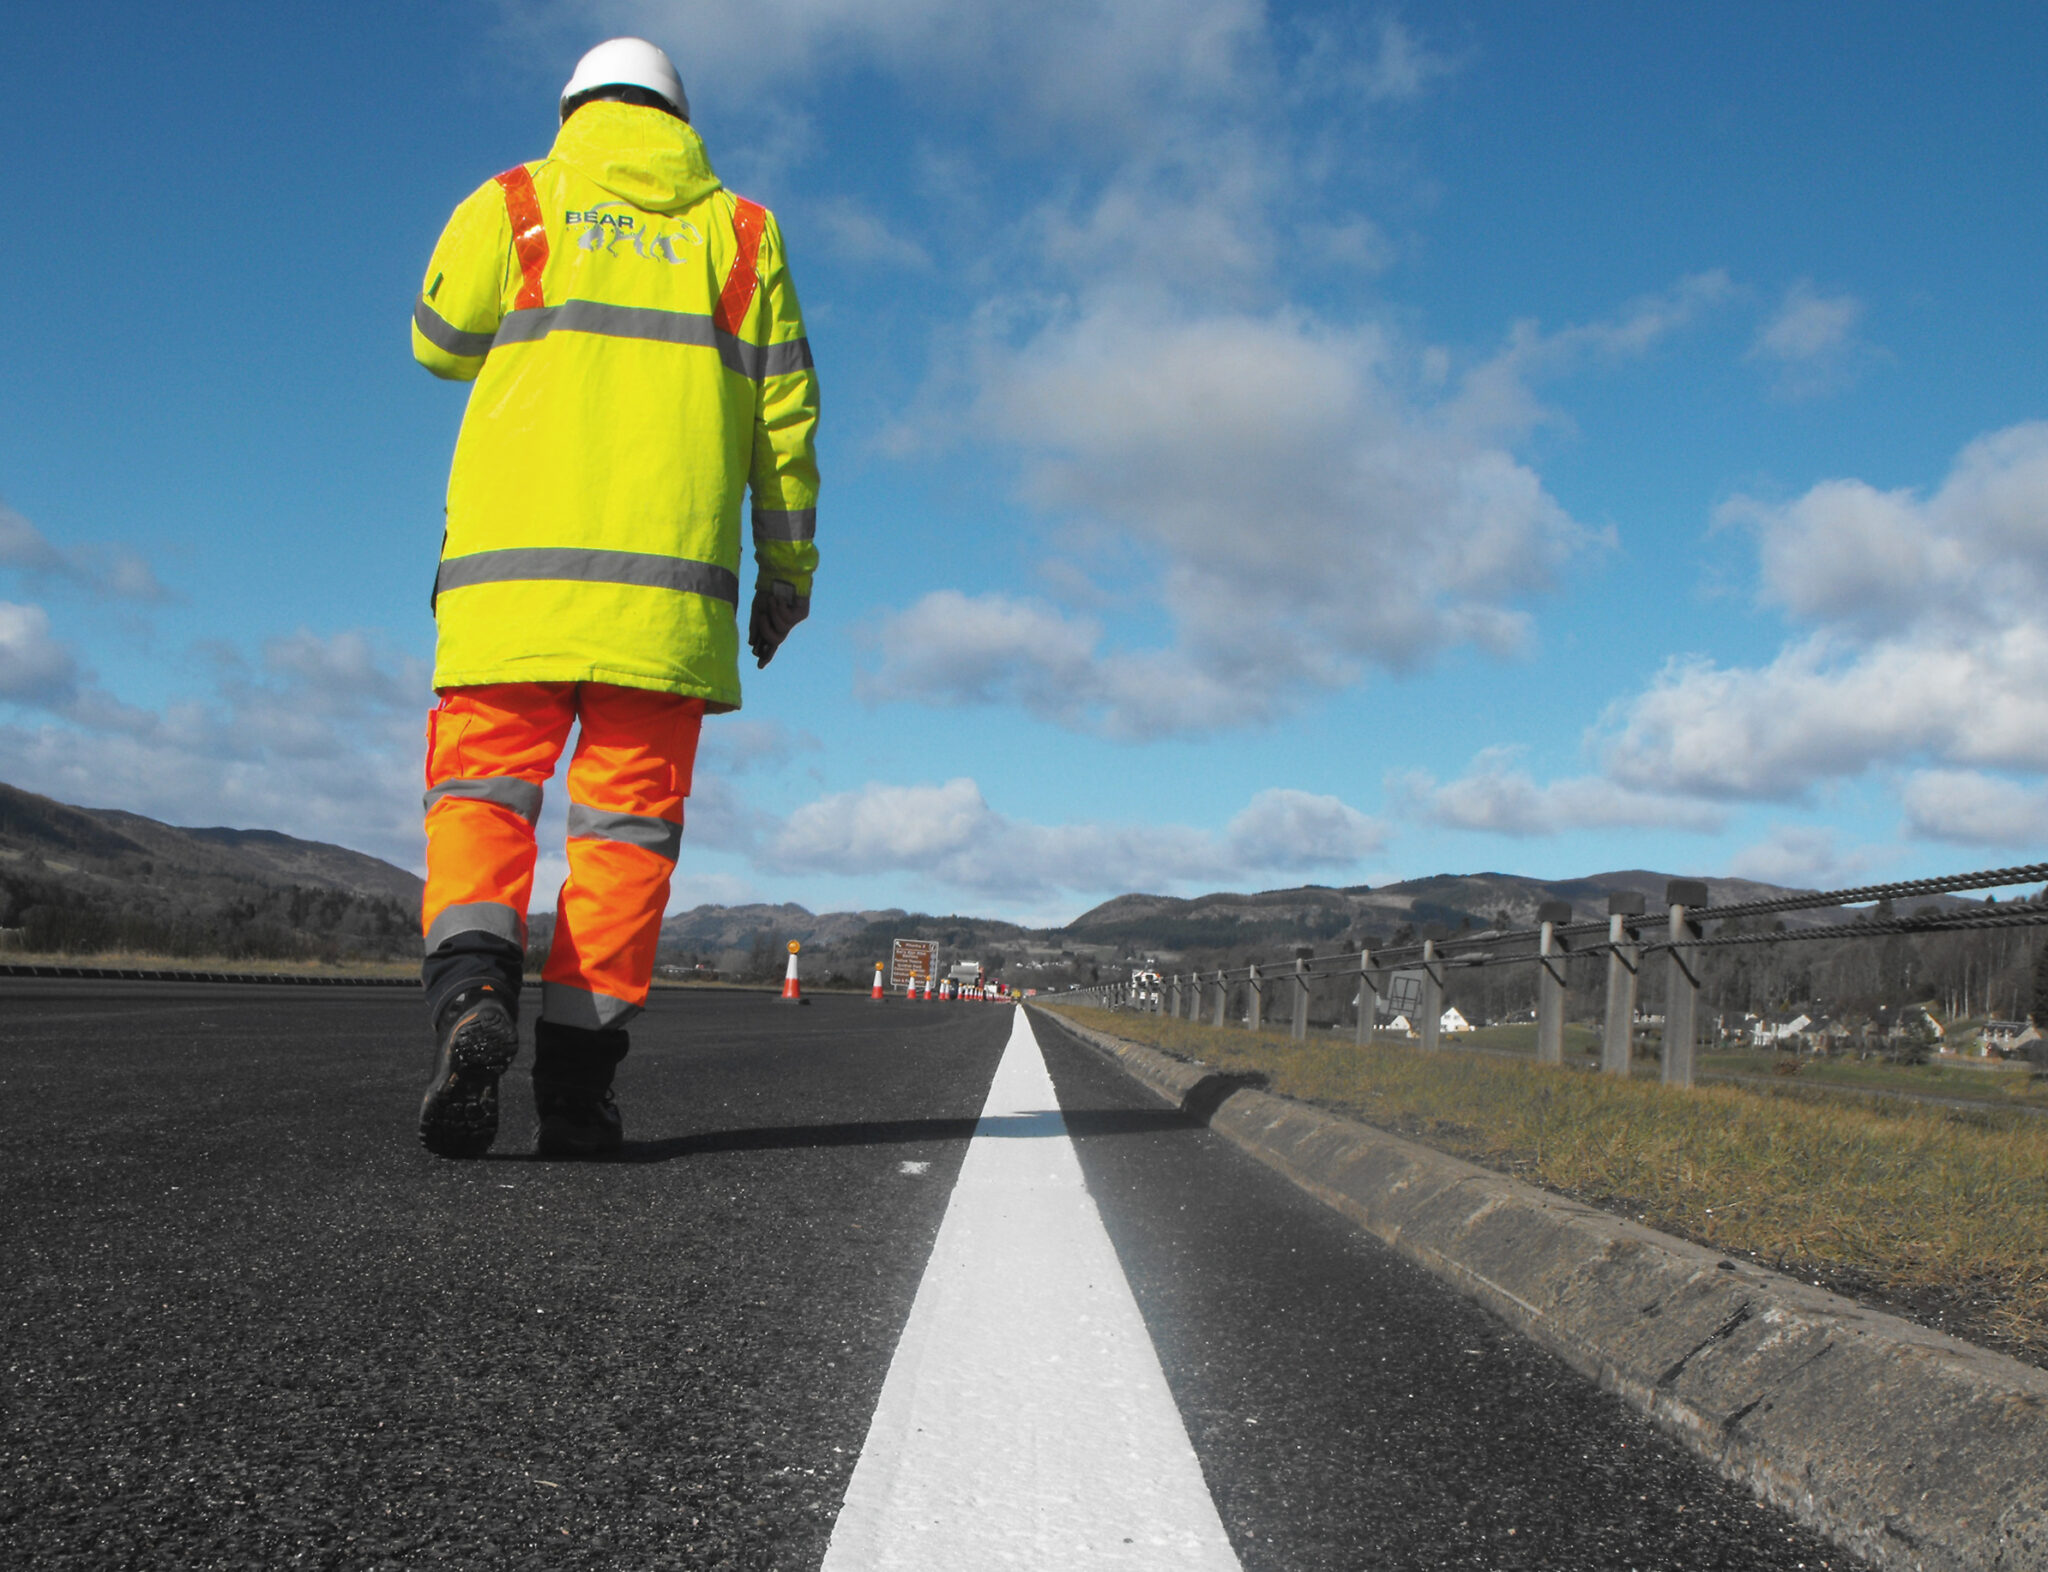 NEW £450,000 OVERNIGHT SURFACING PROJECT PLANNED FOR A82 NORTH OF SPEAN BRIDGE